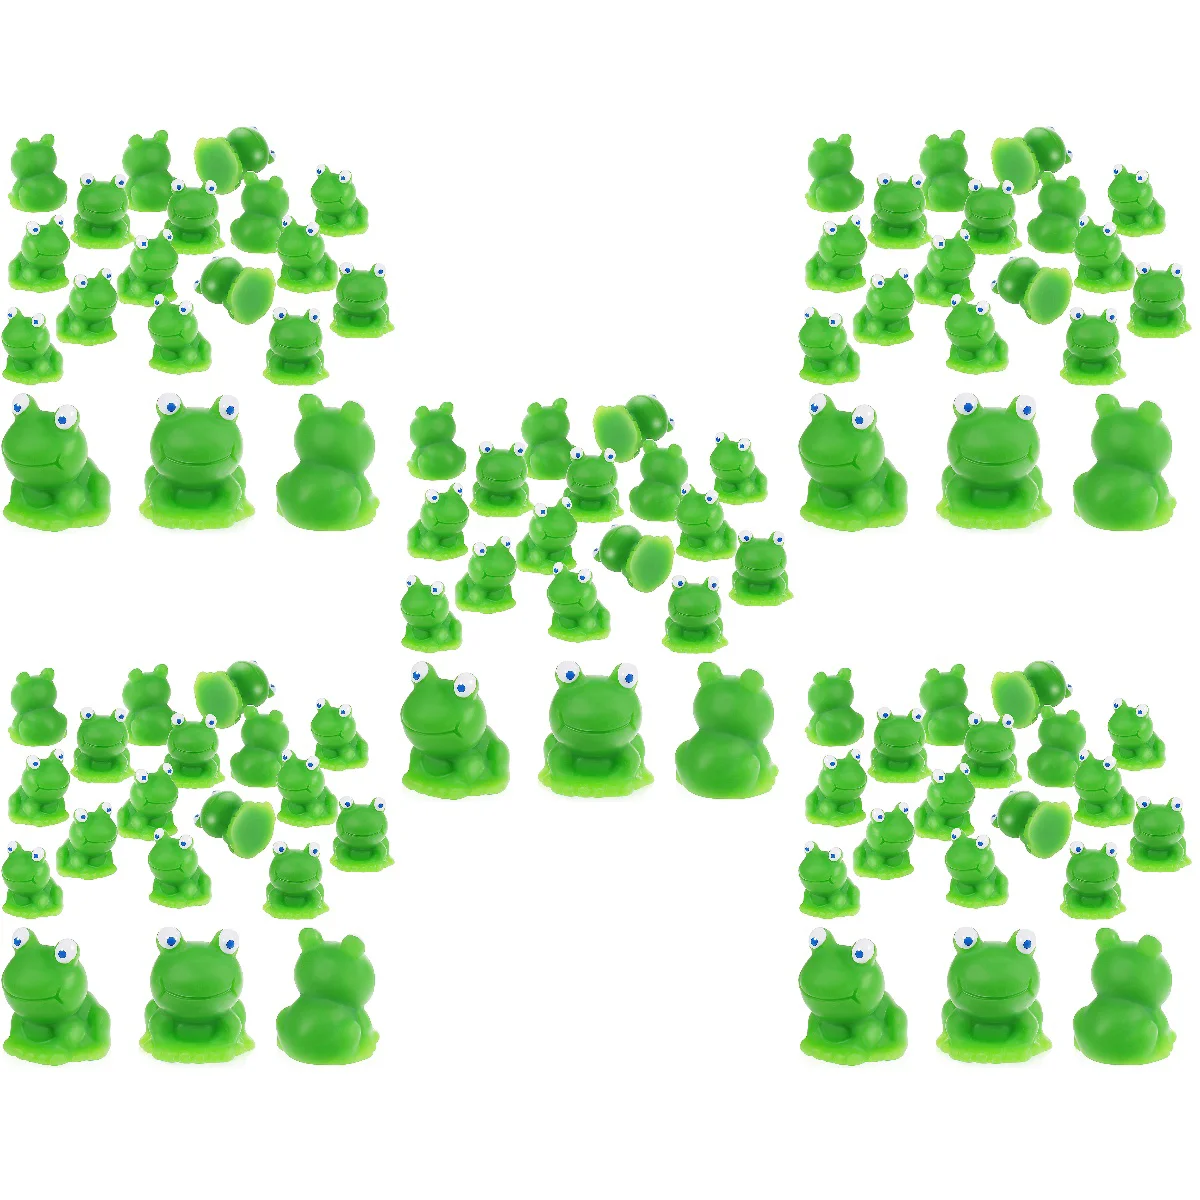 100 Pcs Little Frog Frogs Decors Figurines Mini Toy Small Ornaments Statues Resin Number Toys